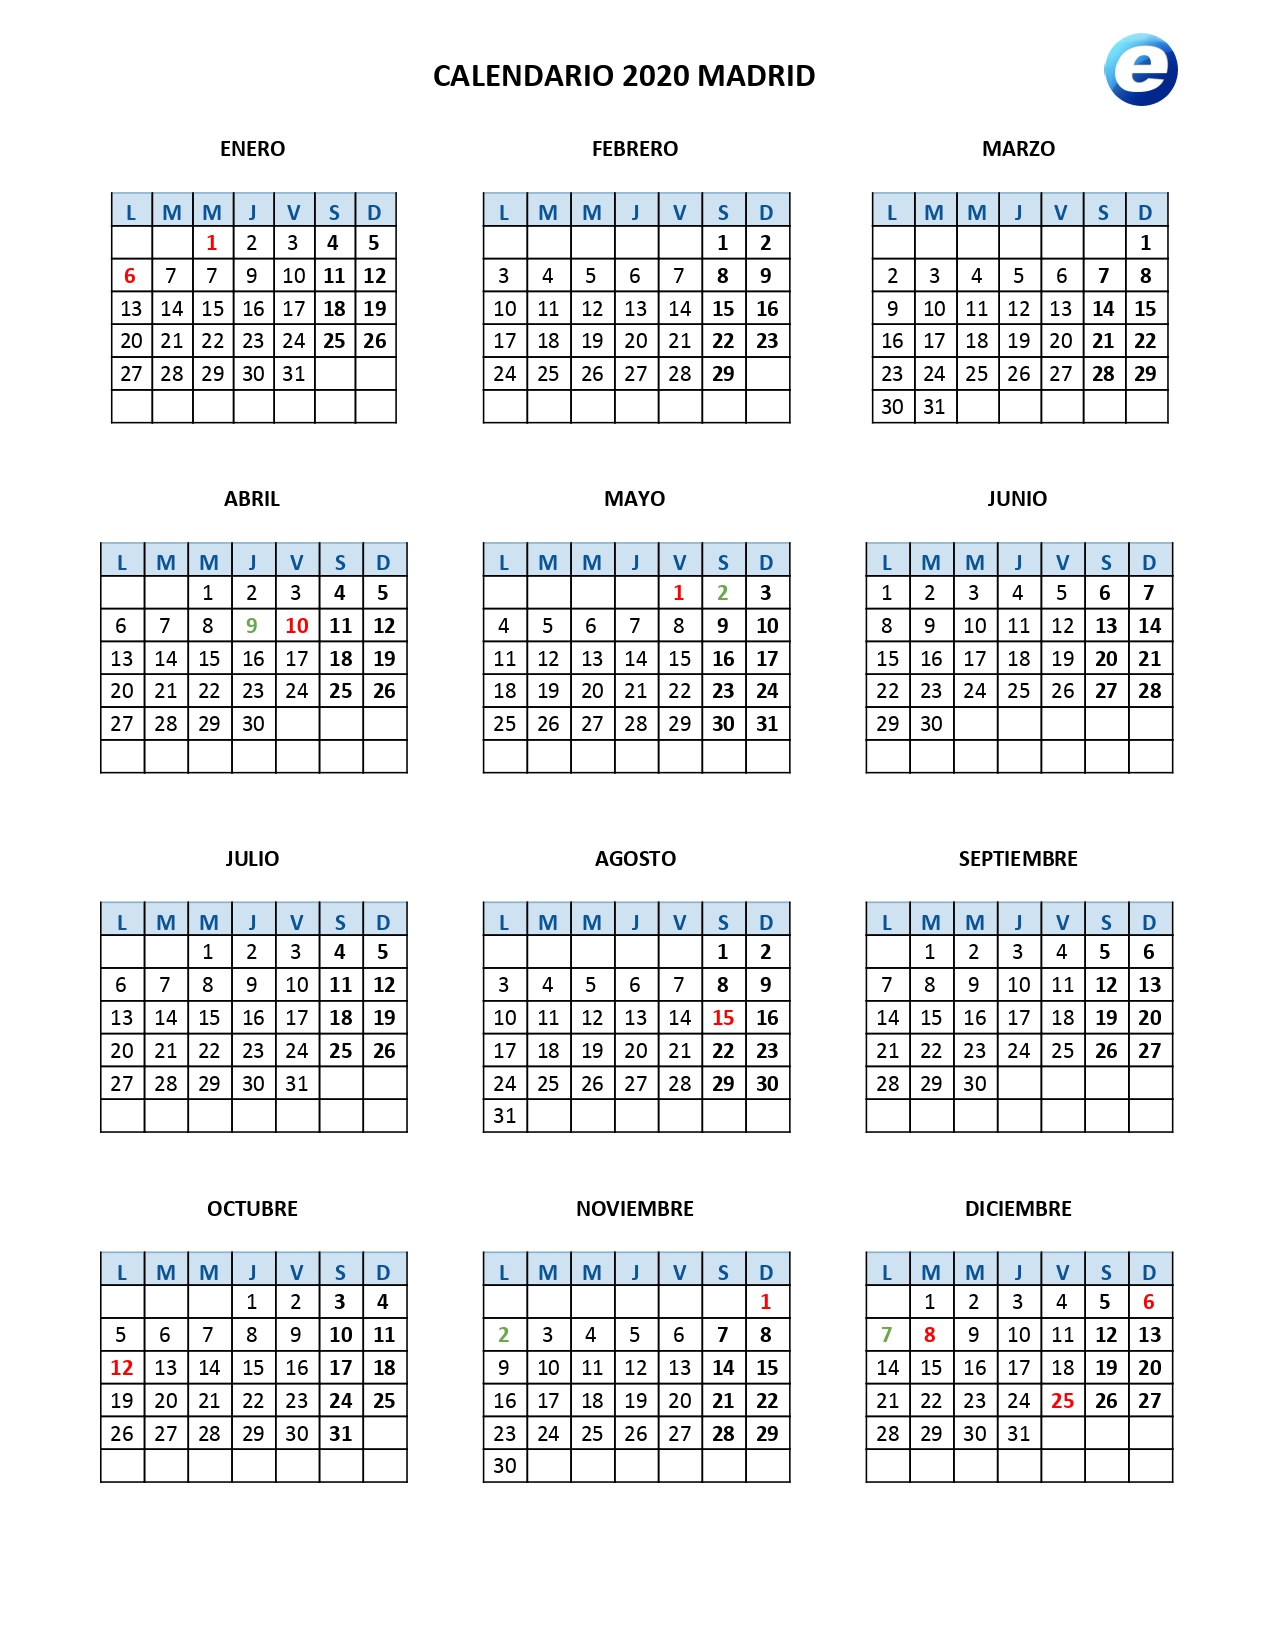 Madrid CALENDARIO 2020_pages-to-jpg-0001